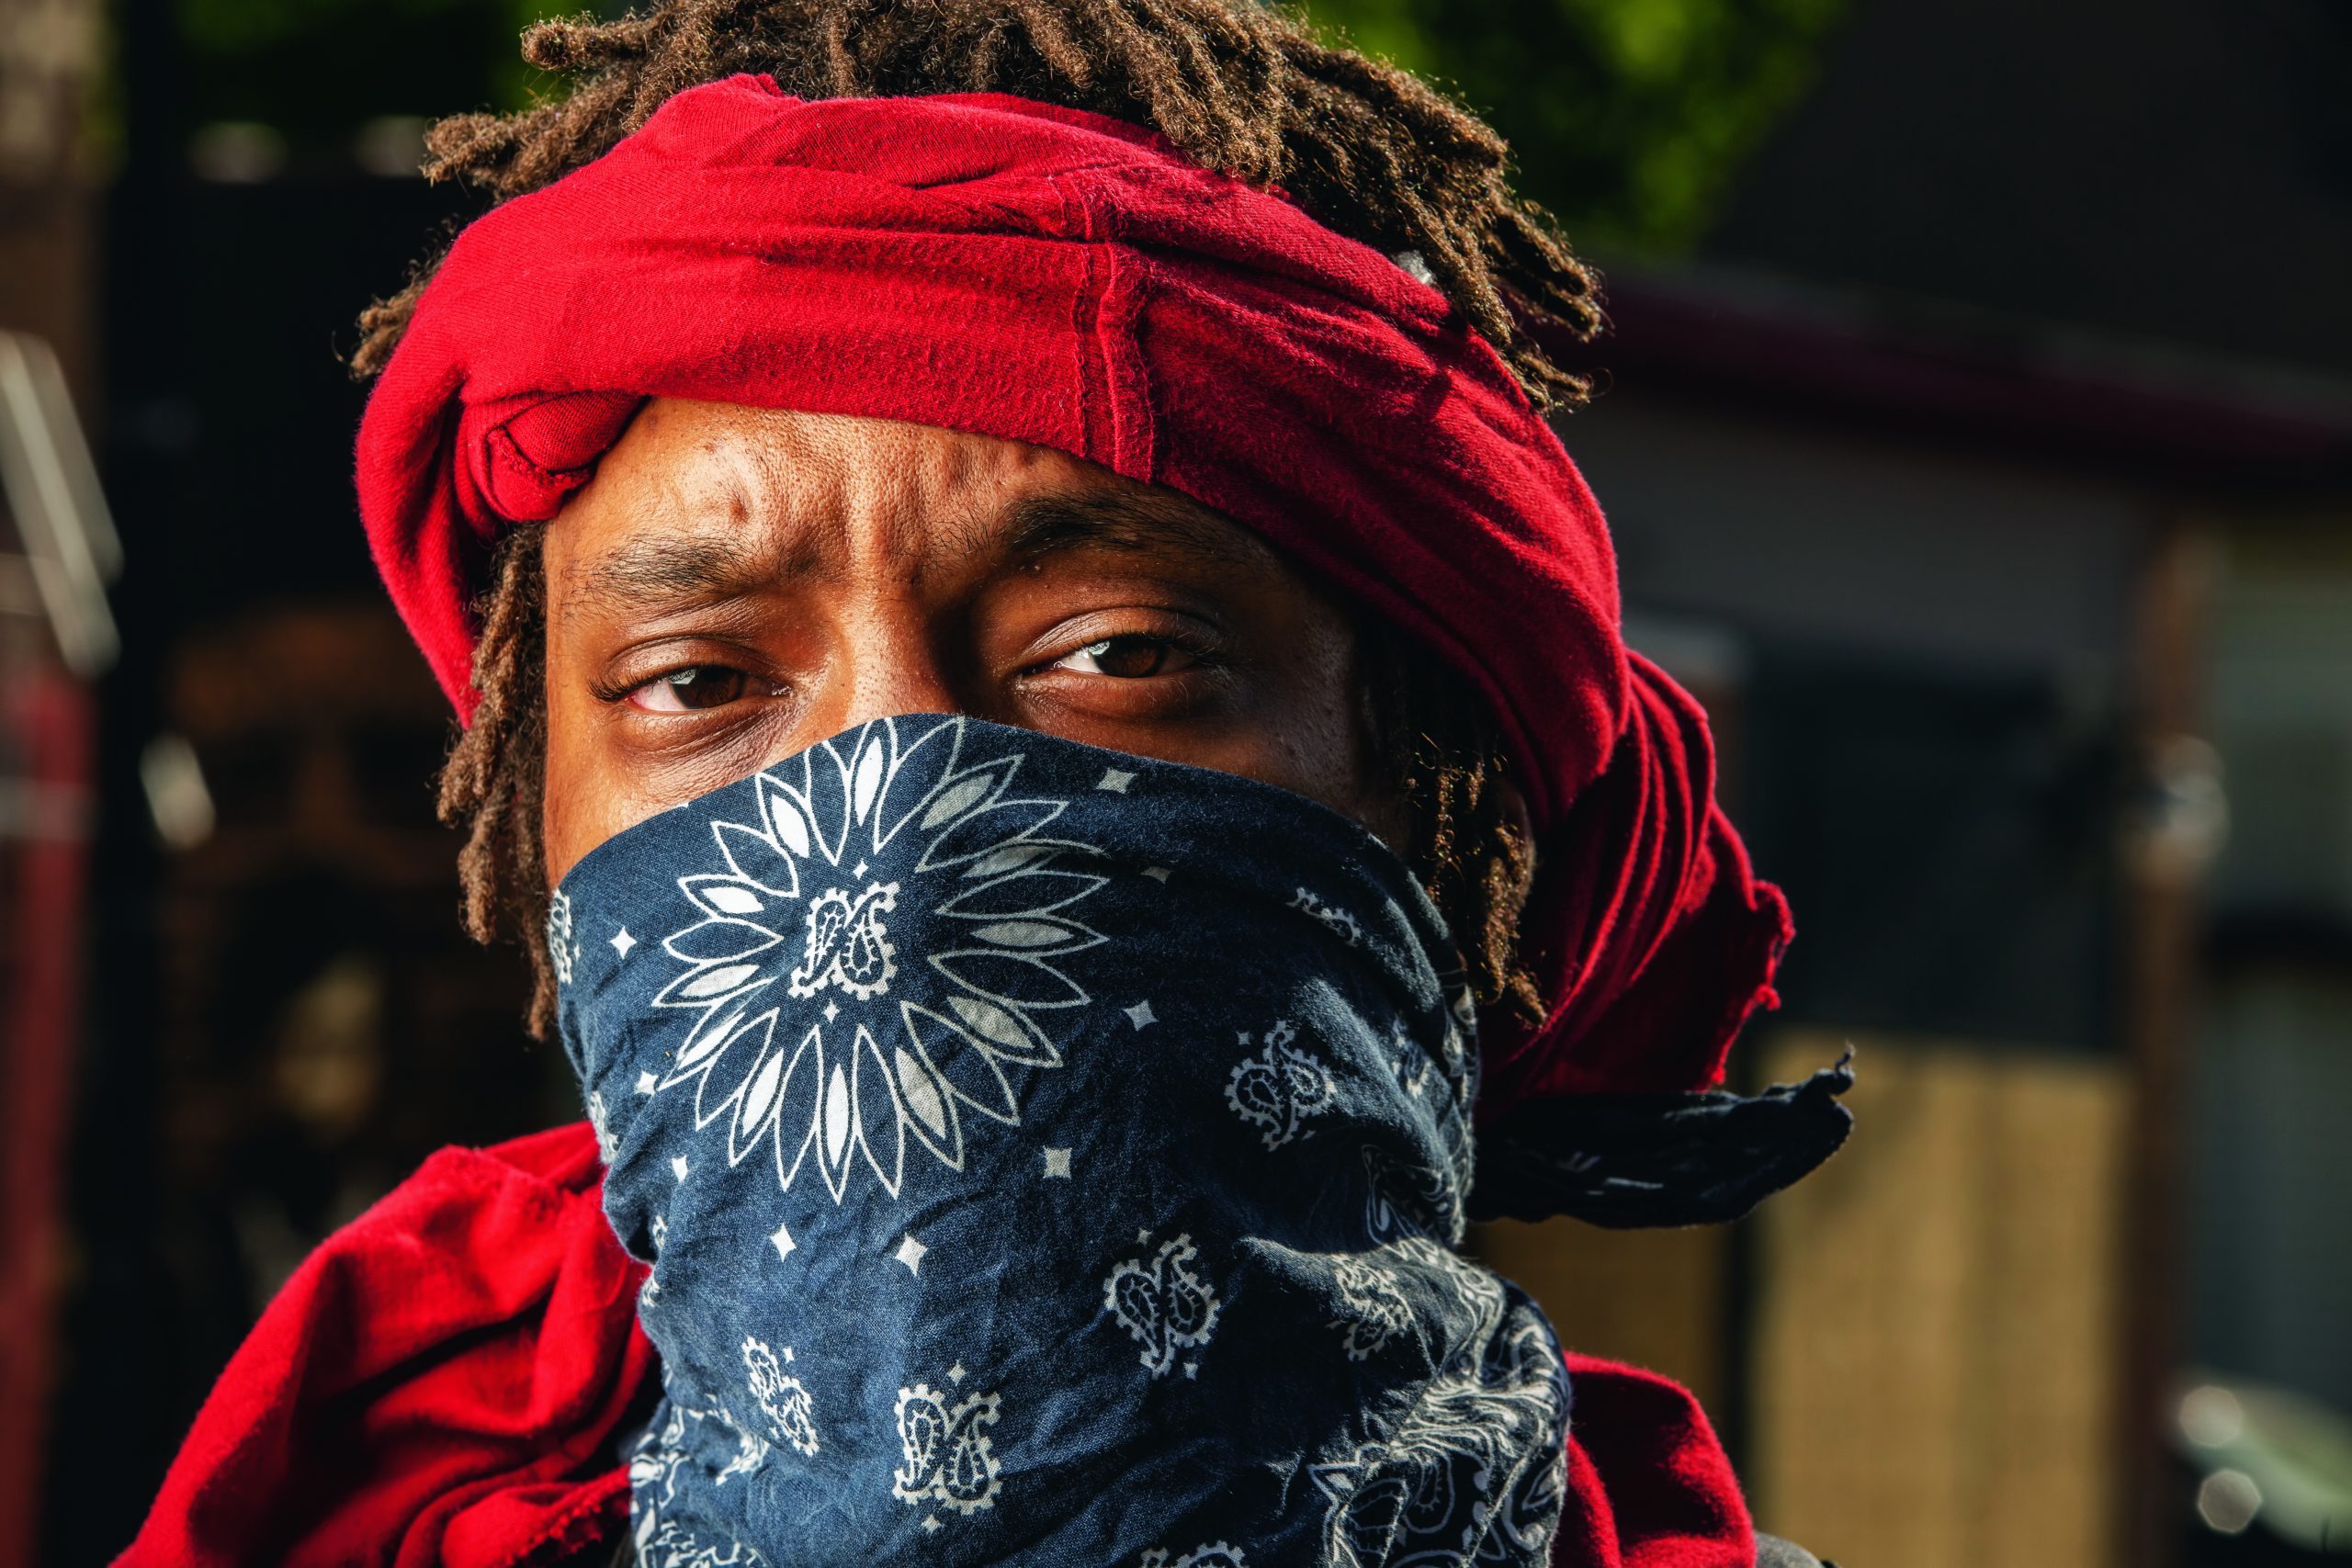 A dark-skinned man with a red cloth wrapped around his dreadlocked hair and a blue bandana covering his face